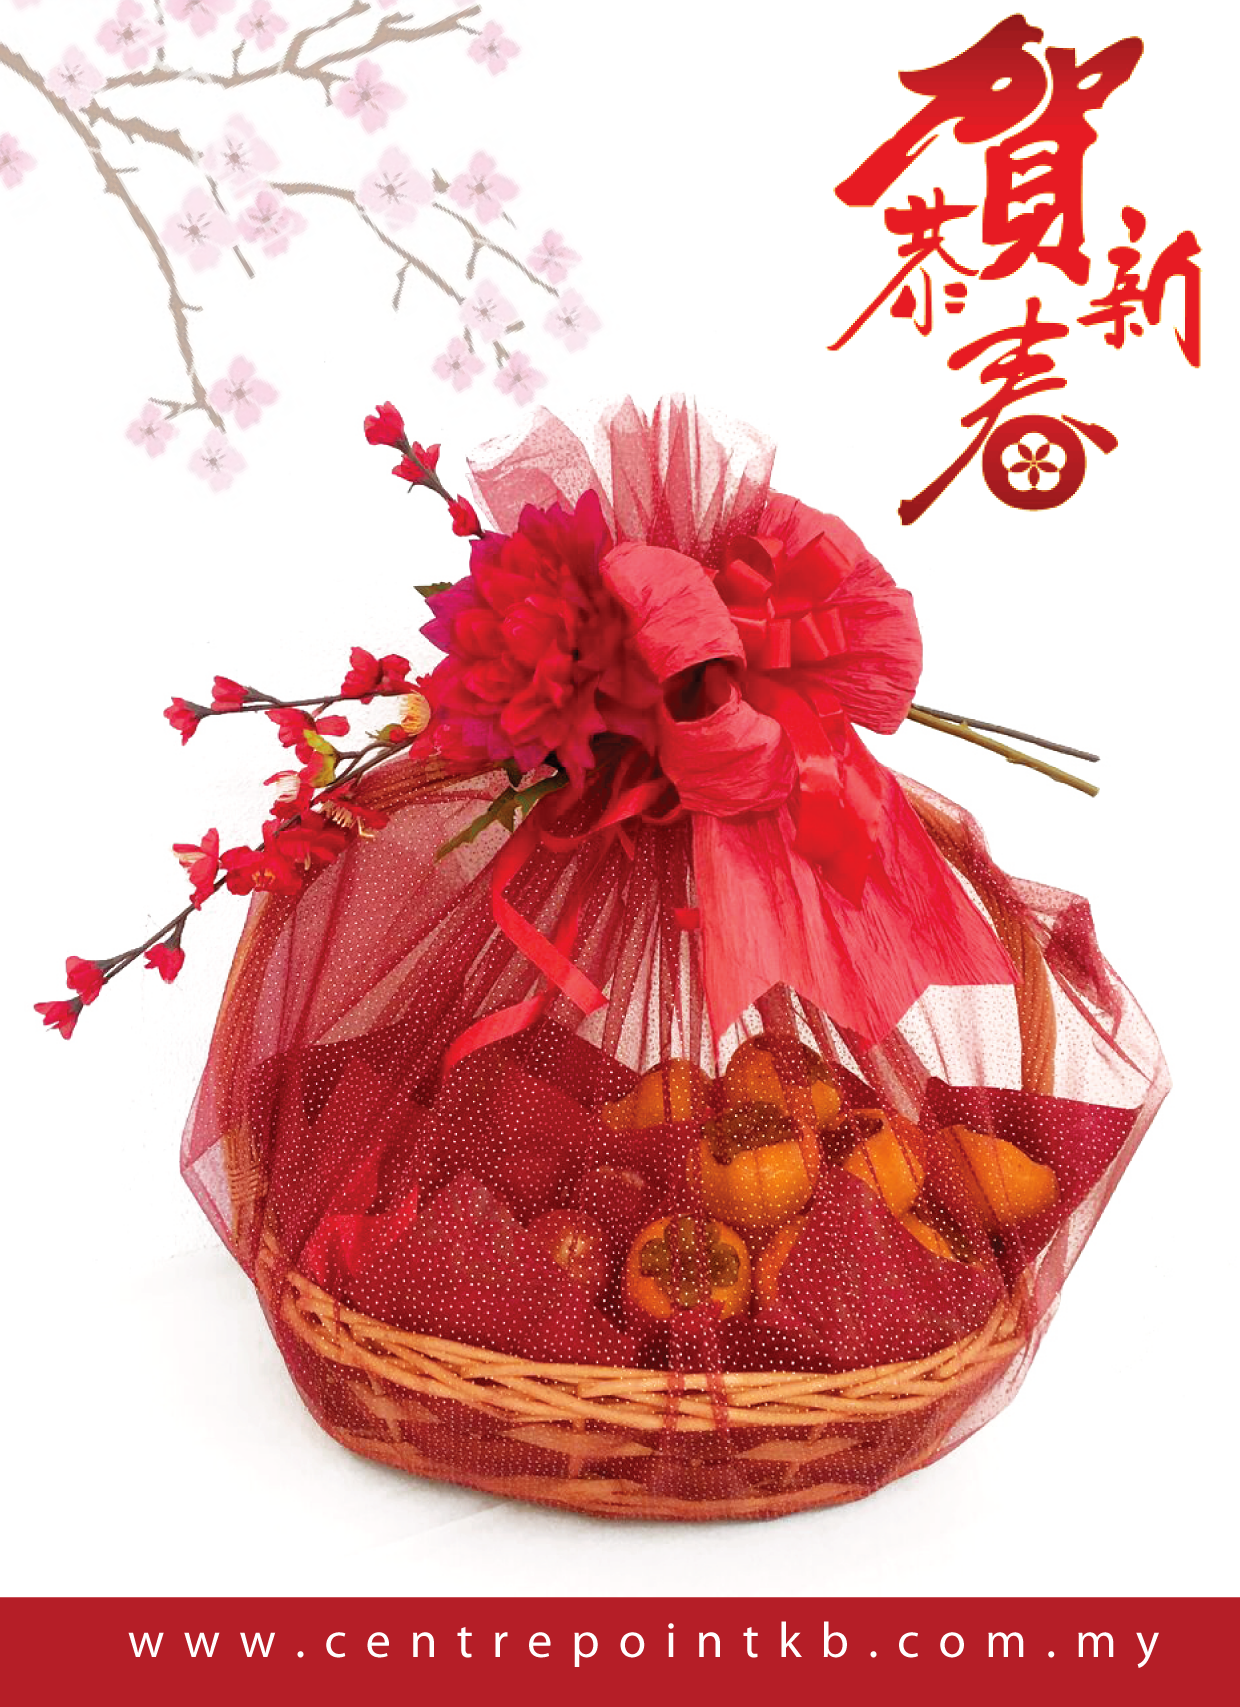 Traditional Chinese Fruit & Flower Basket (RM 320.00)